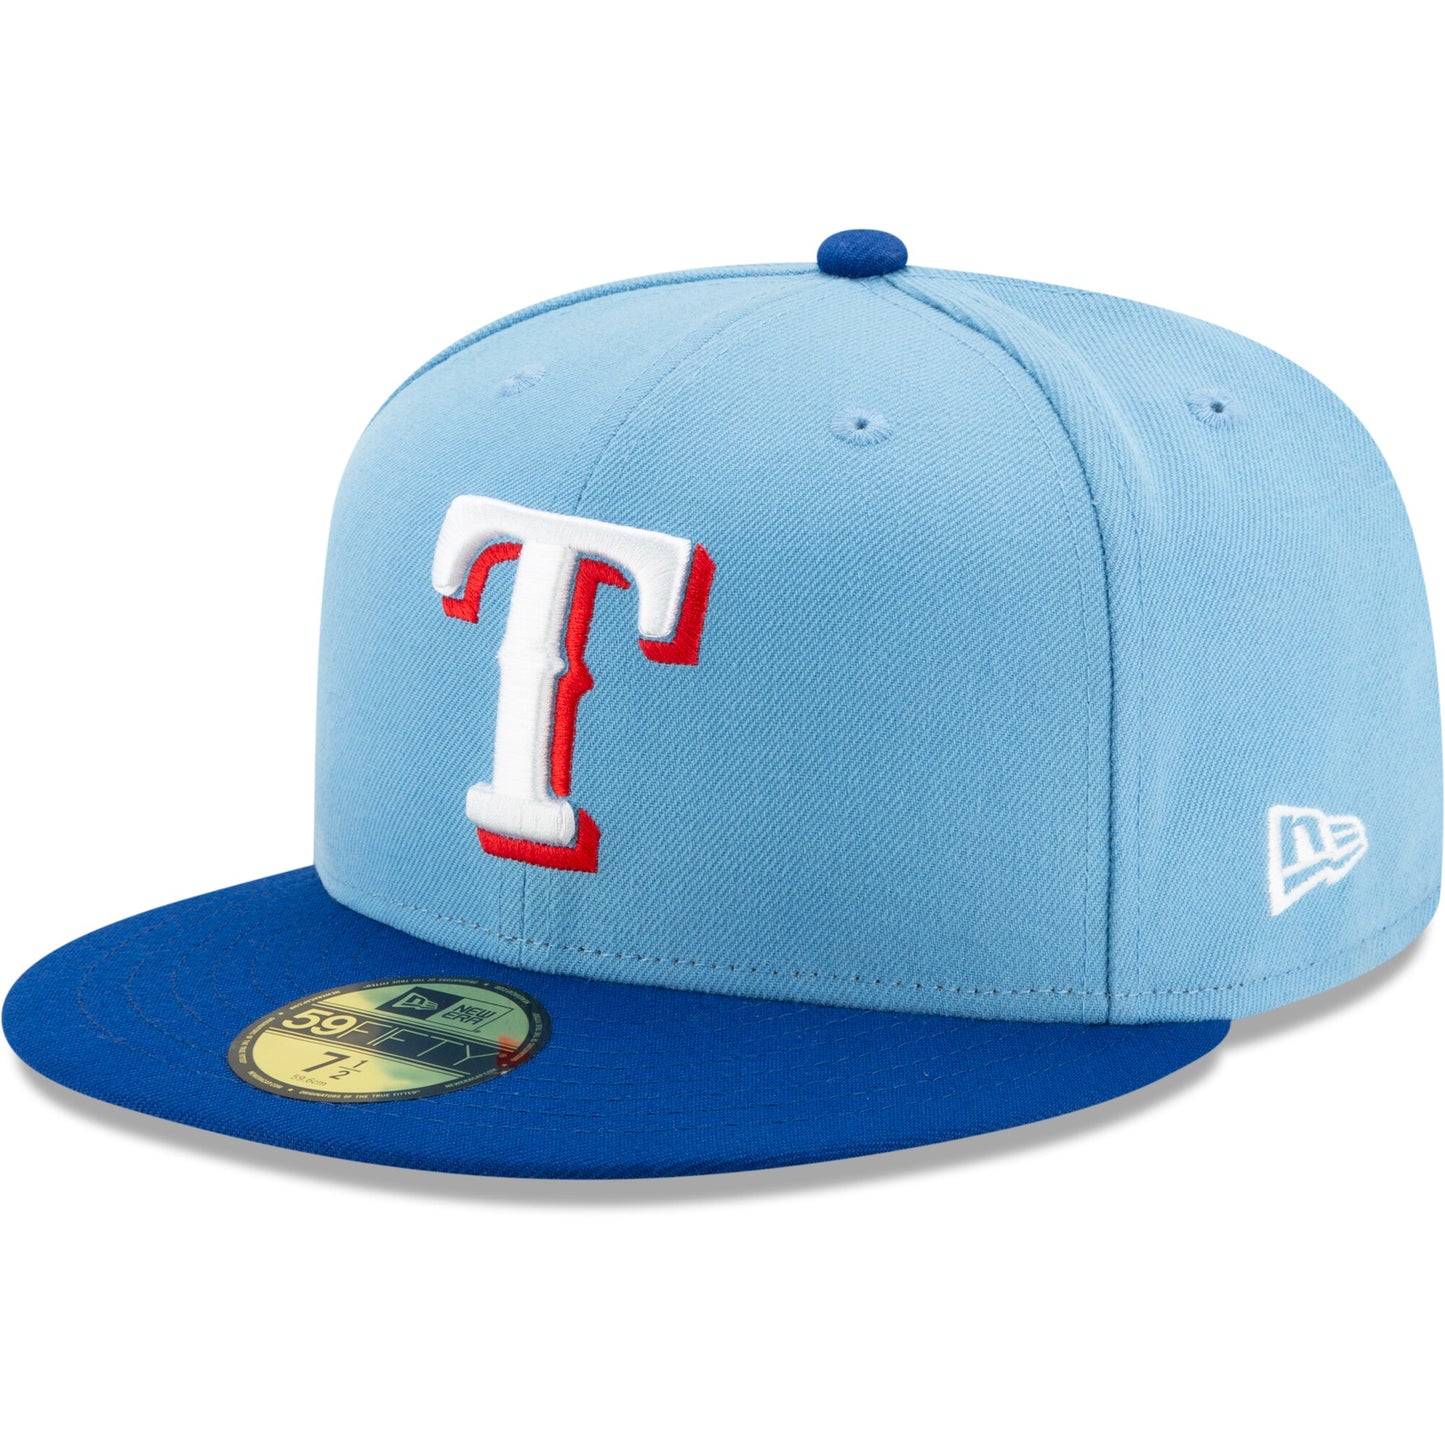 Texas Rangers New Era On-Field Authentic Collection 59FIFTY Fitted Hat - Light Blue/Royal